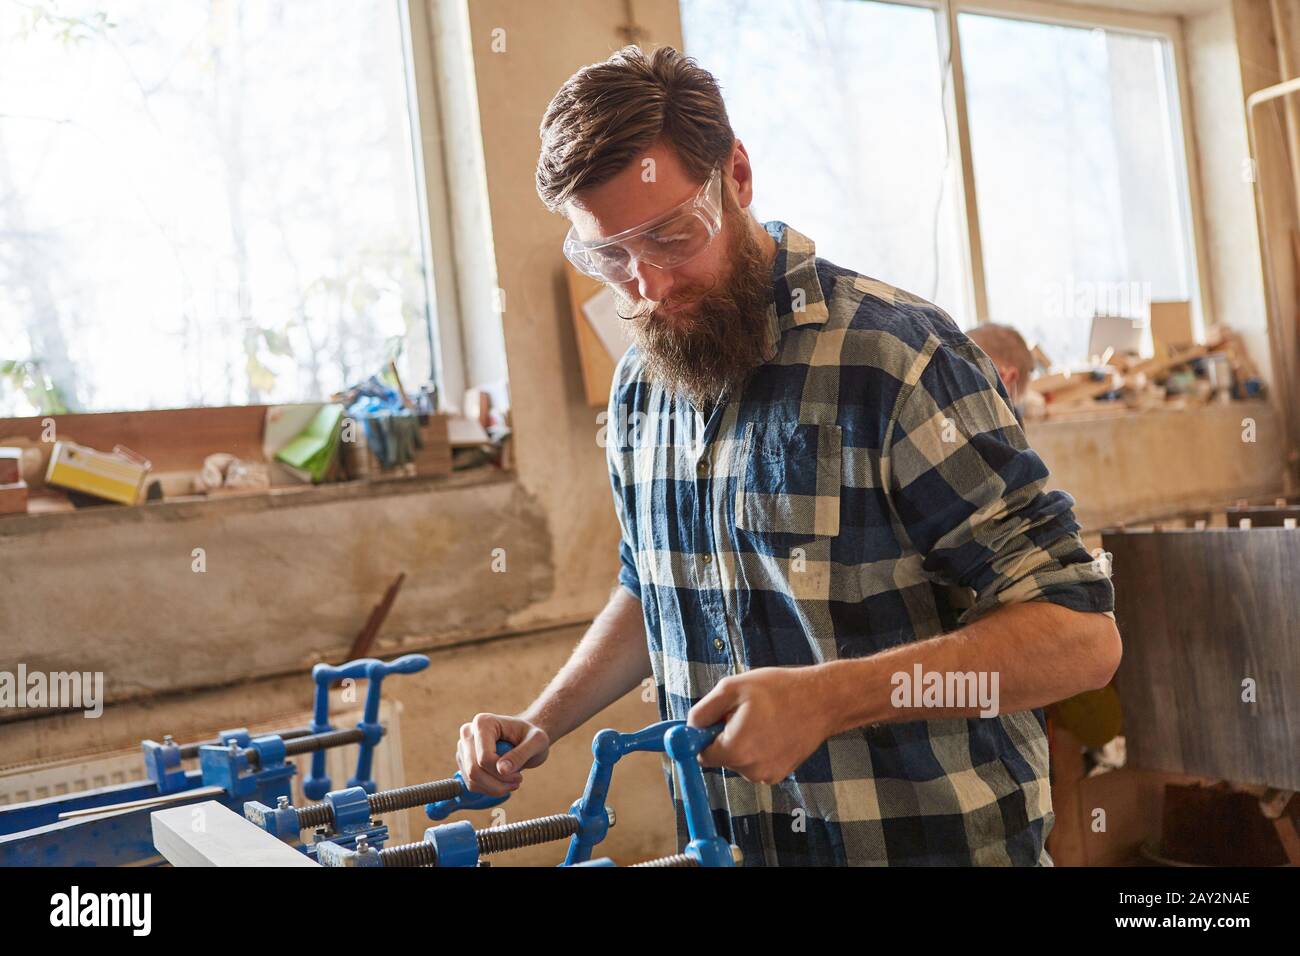 Carpenter with safety glasses as a furniture maker works with wood on a vice Stock Photo